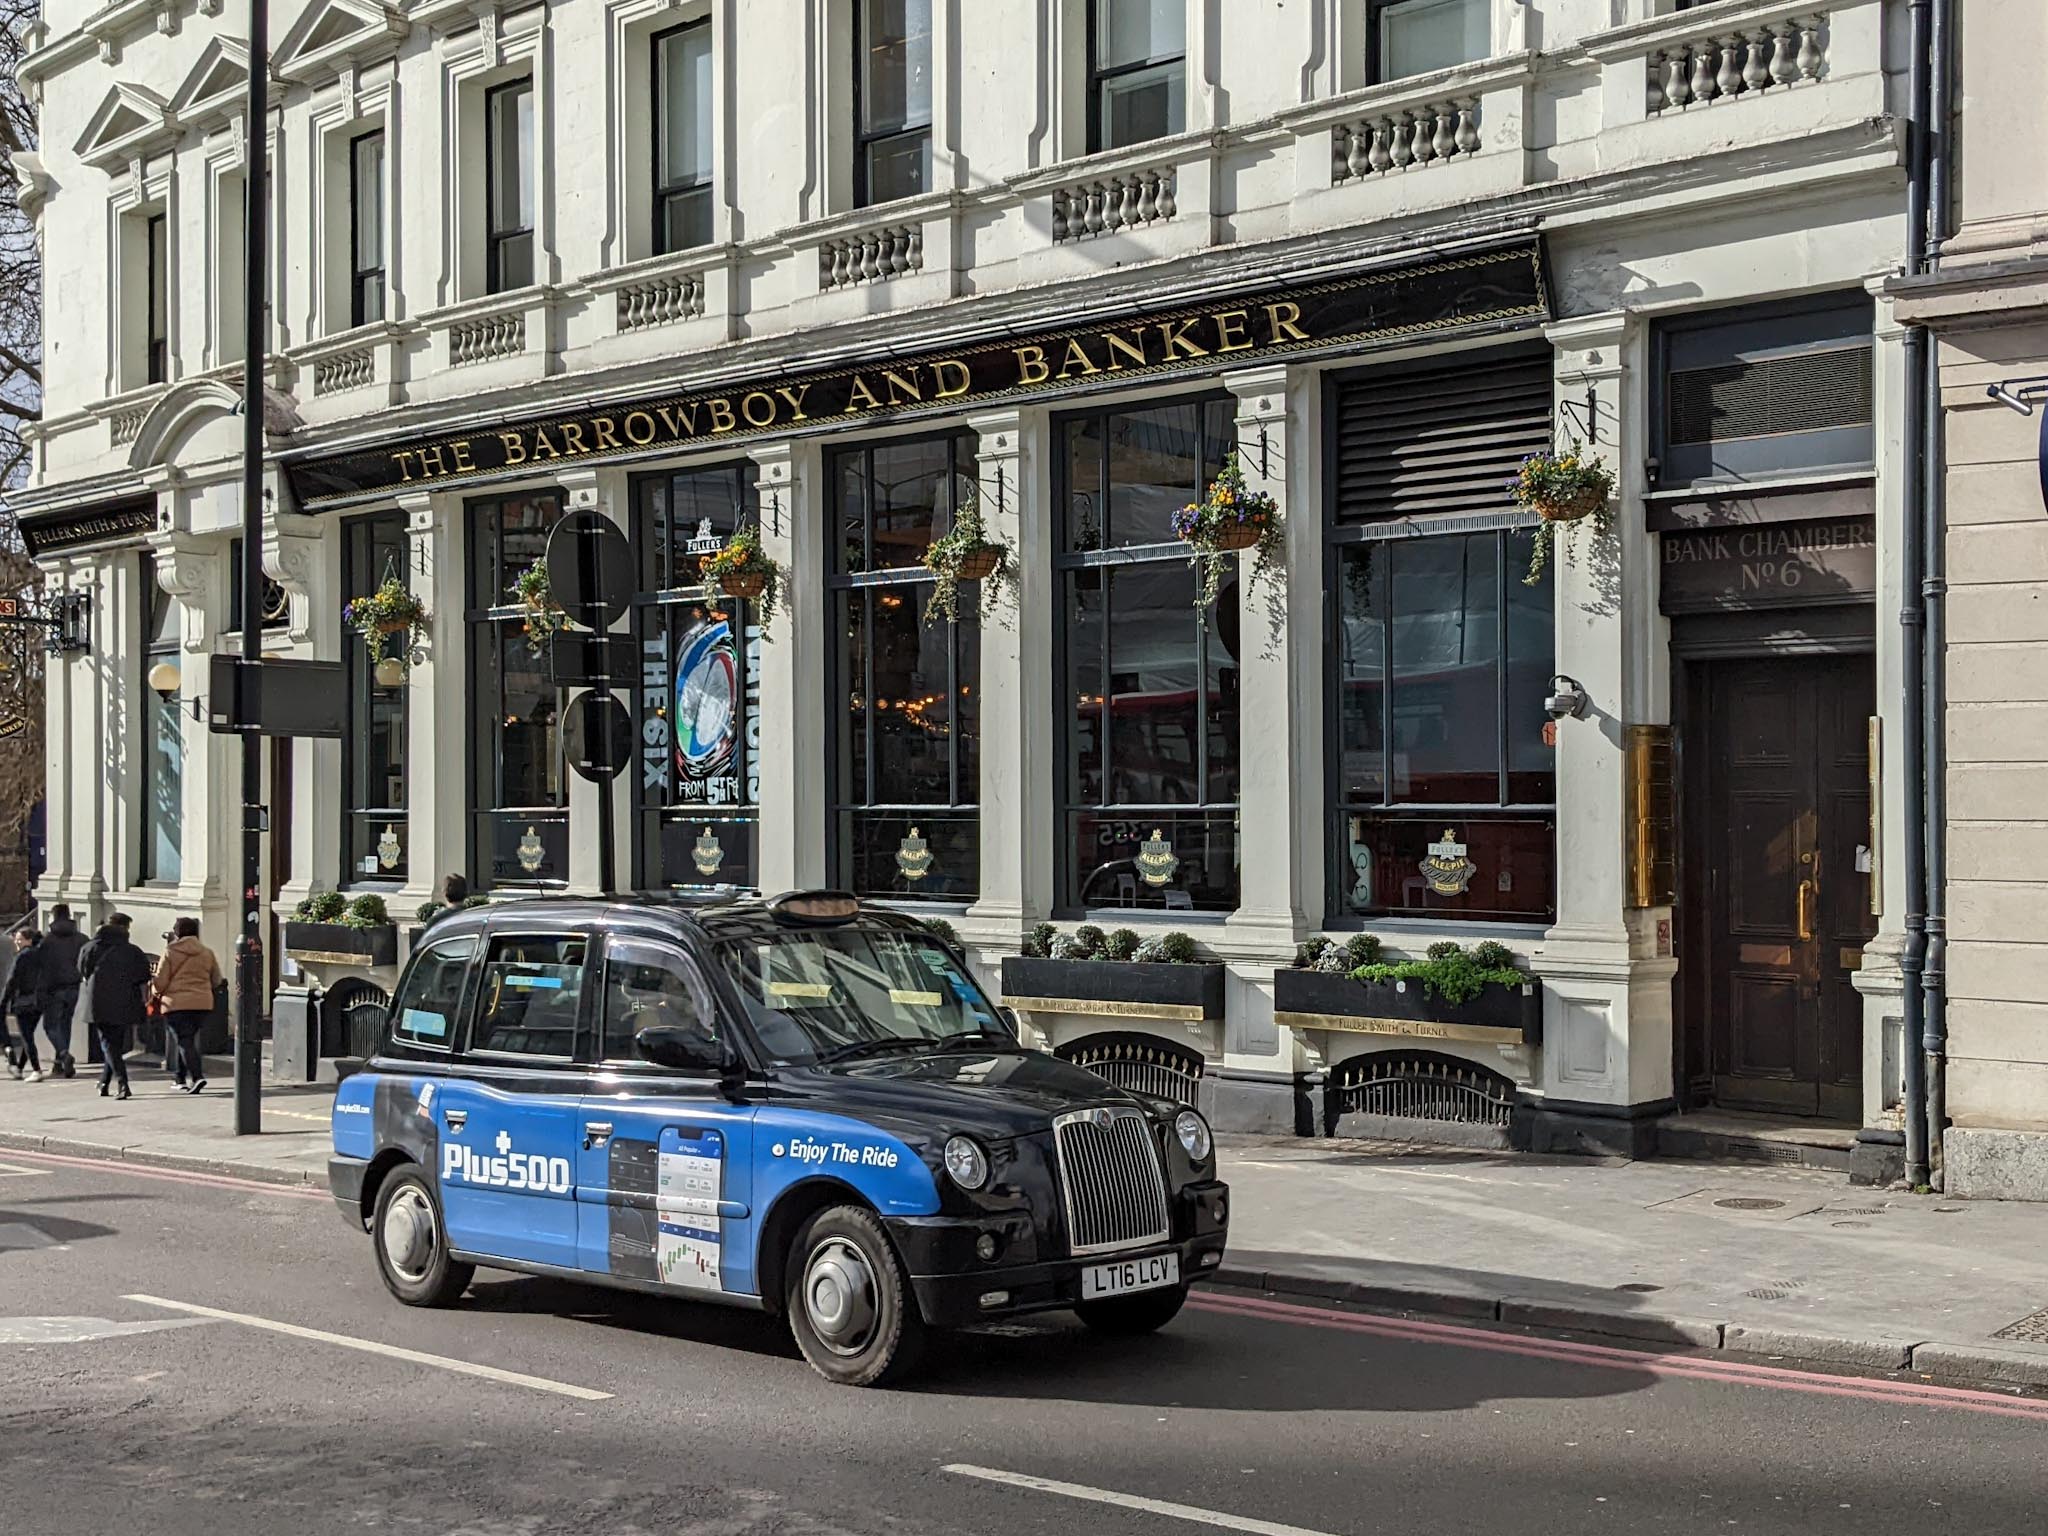 A blue/black London Taxi sponsored by Plus500.